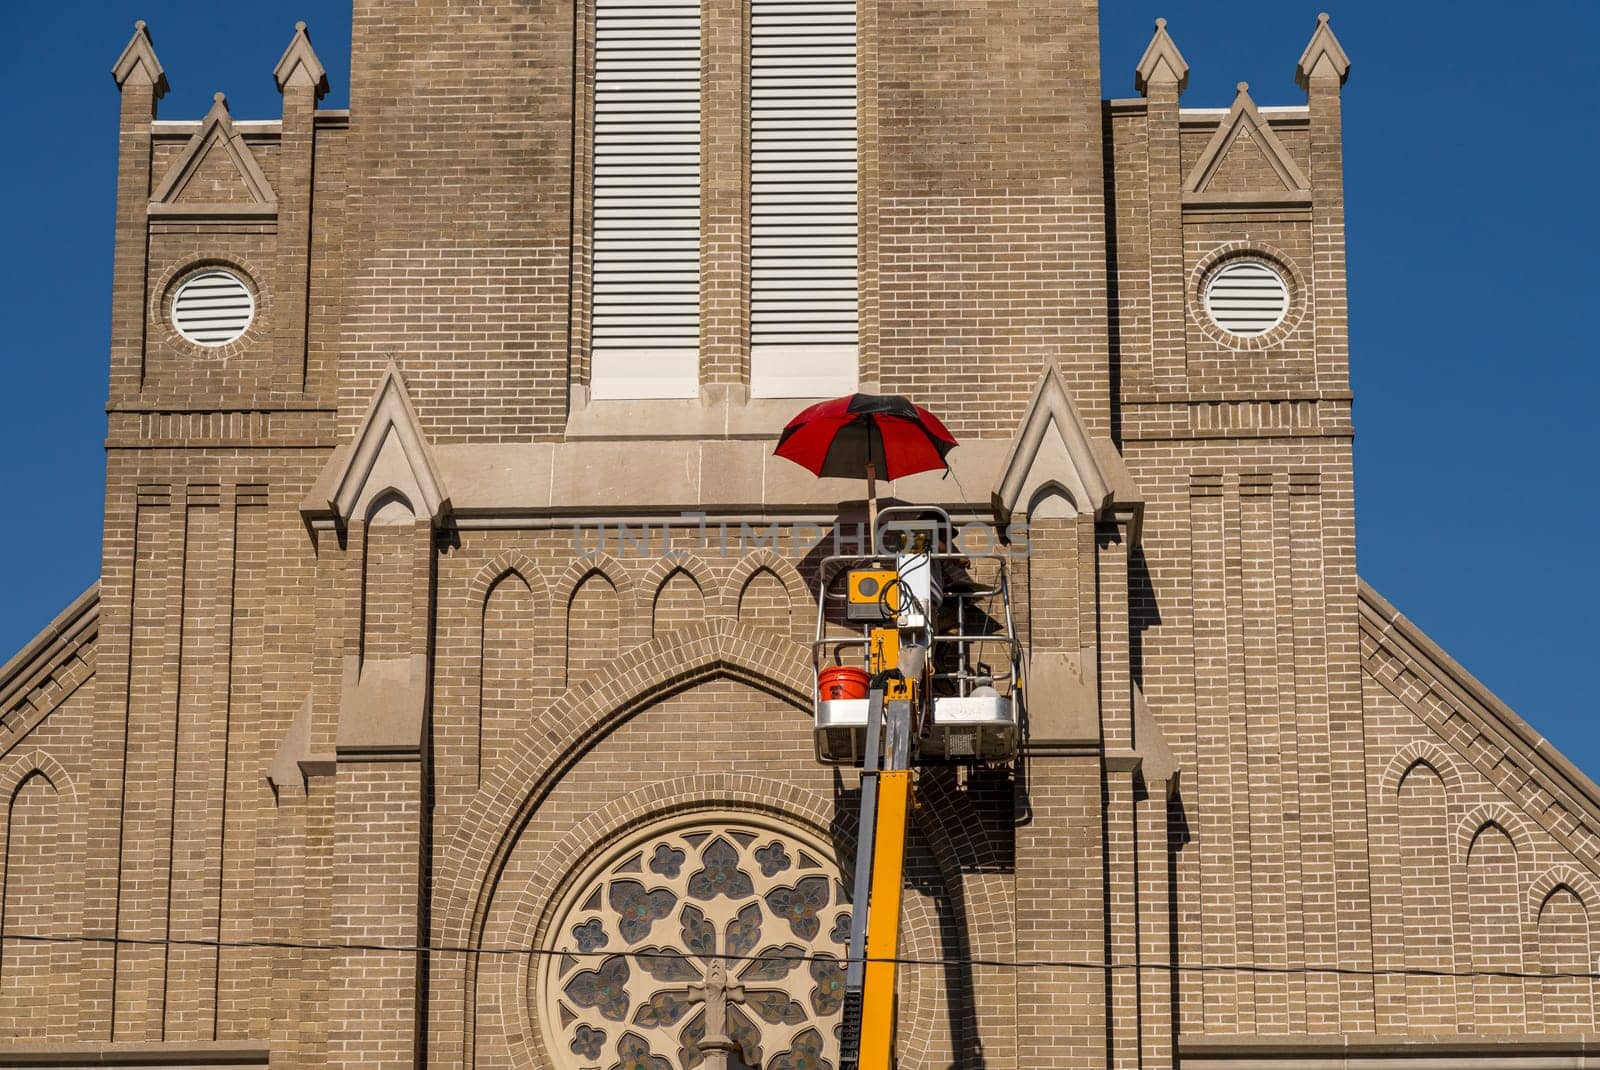 Repair work with powered lift to brickwork of St Joseph in Greenville MS by steheap